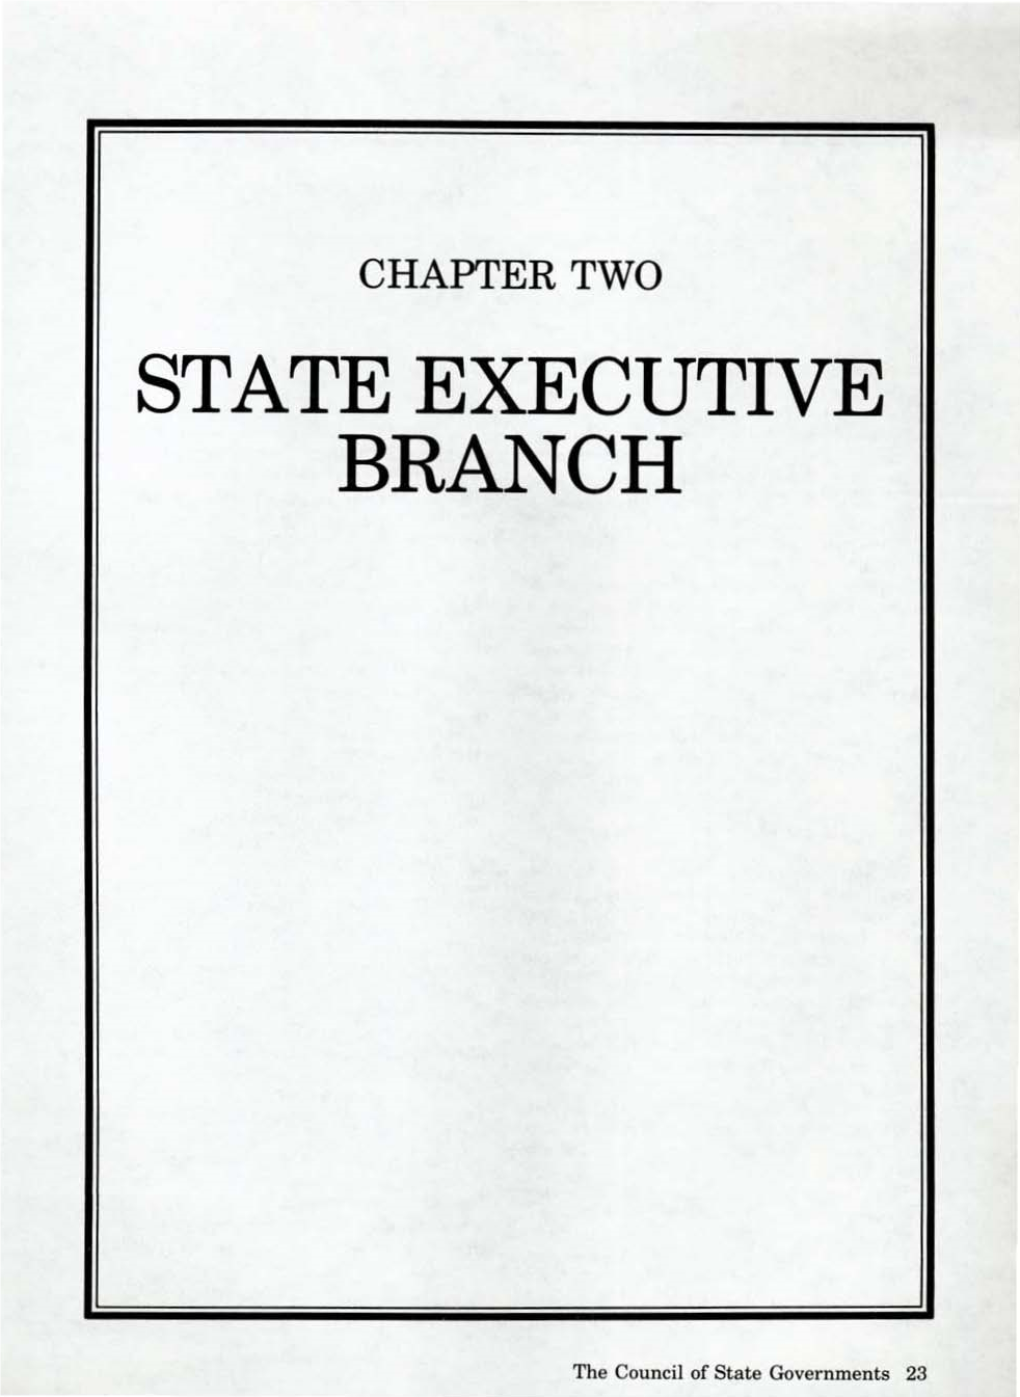 Chapter 2, State Executive Branch